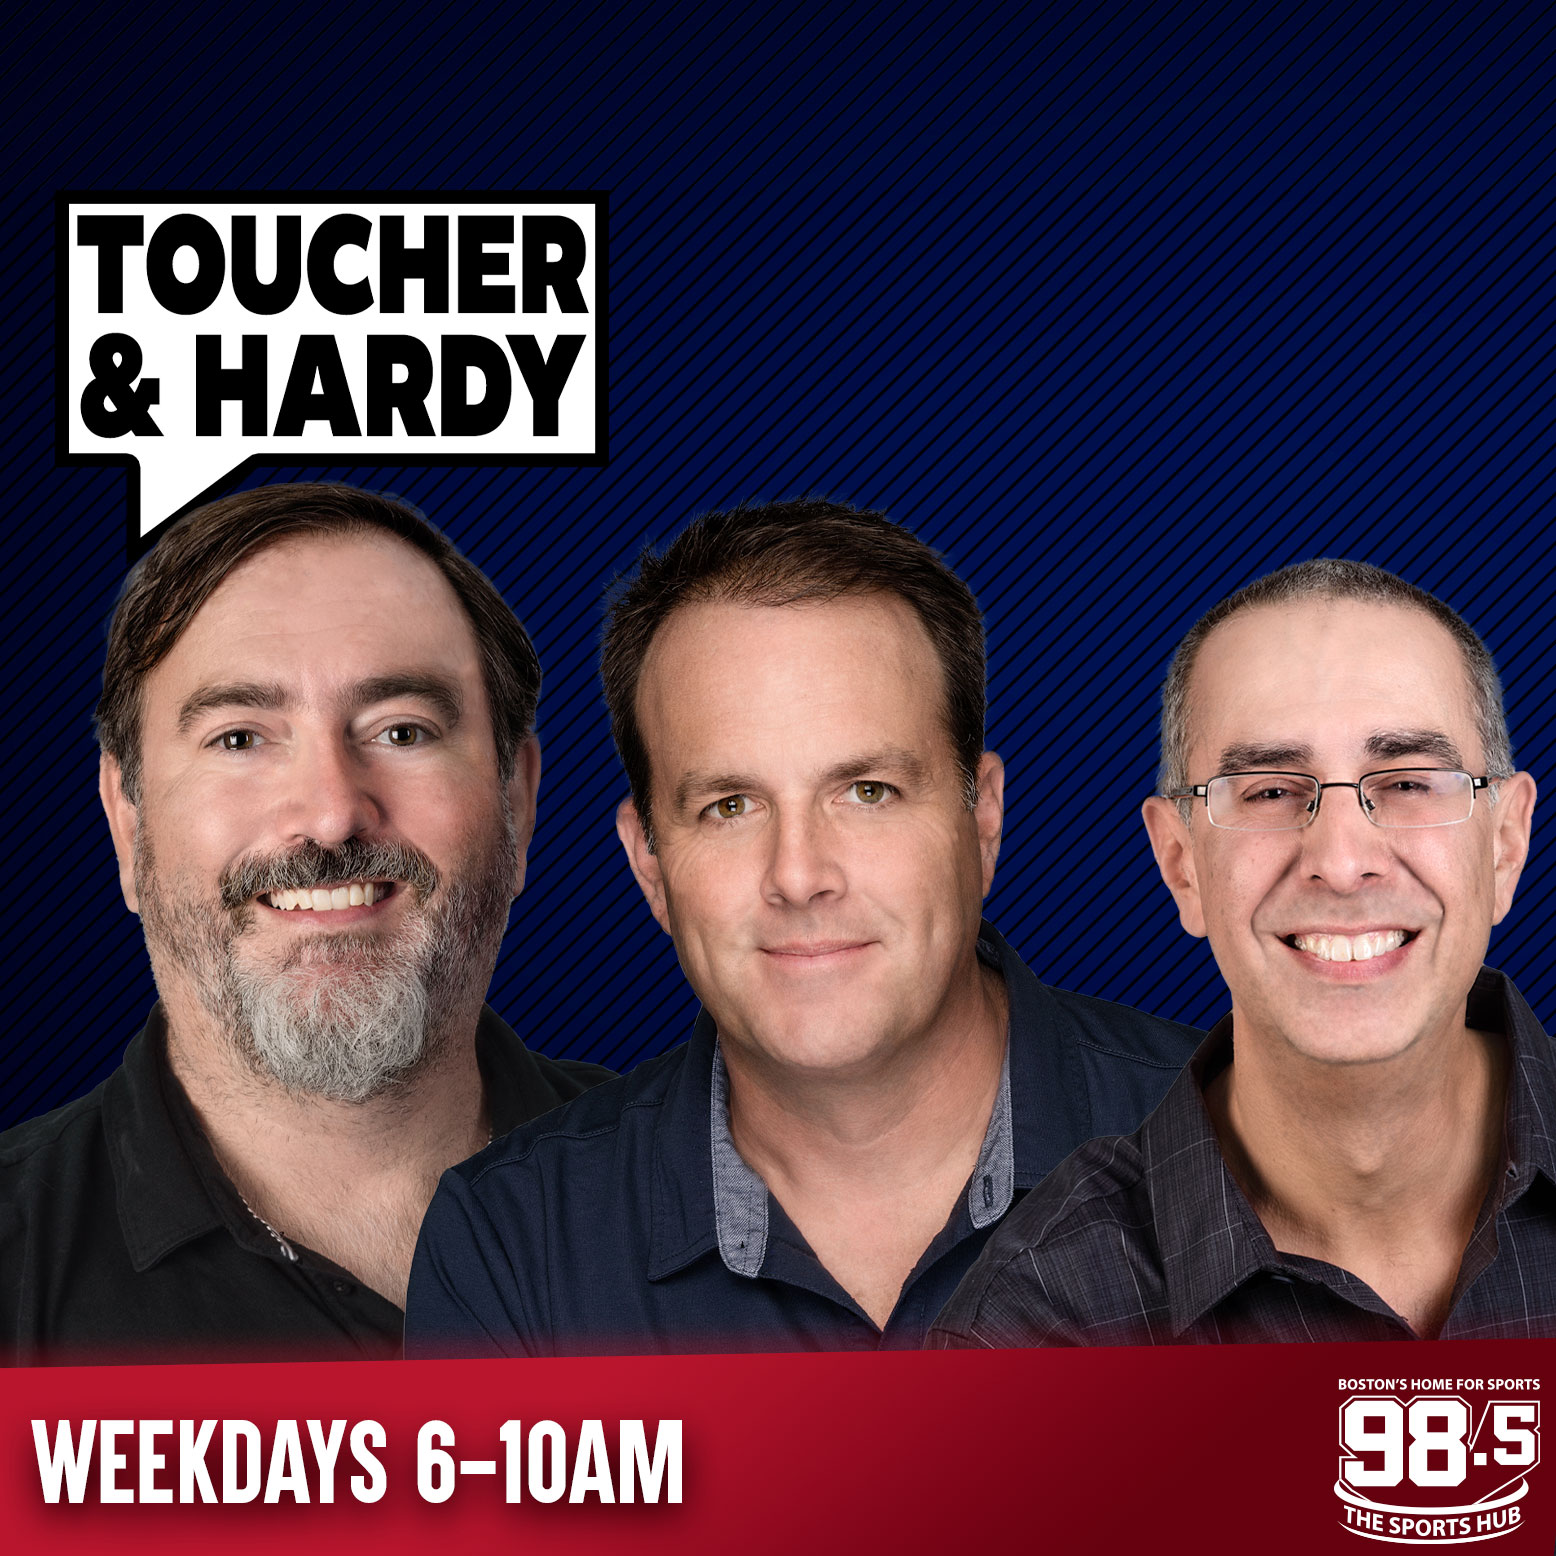 Toucher & Hardy: The Athletic's Jeff Howe weighs in on Belichick's exit from the Patriots